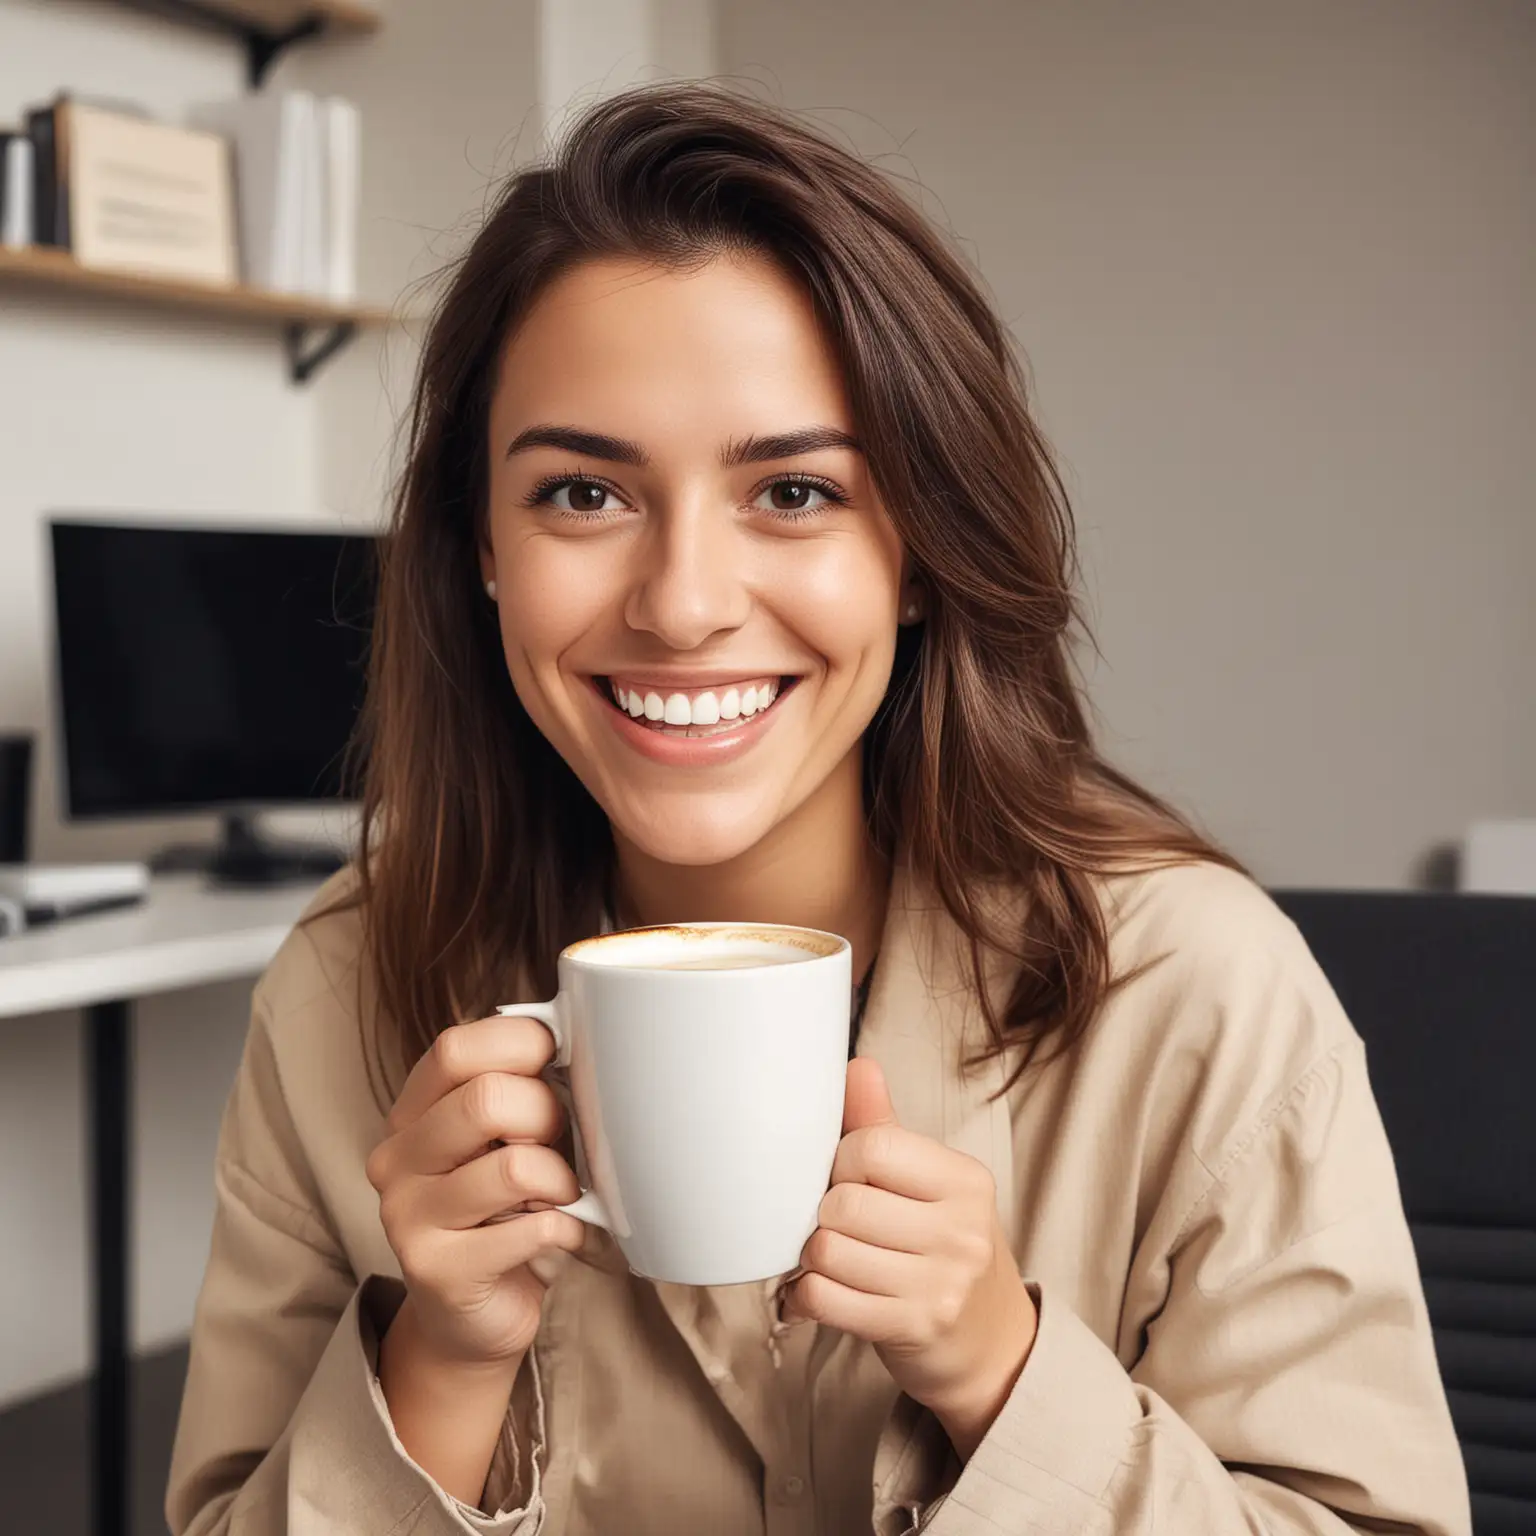 Show me an image of someone happy for having a cup of coffee at the office 

